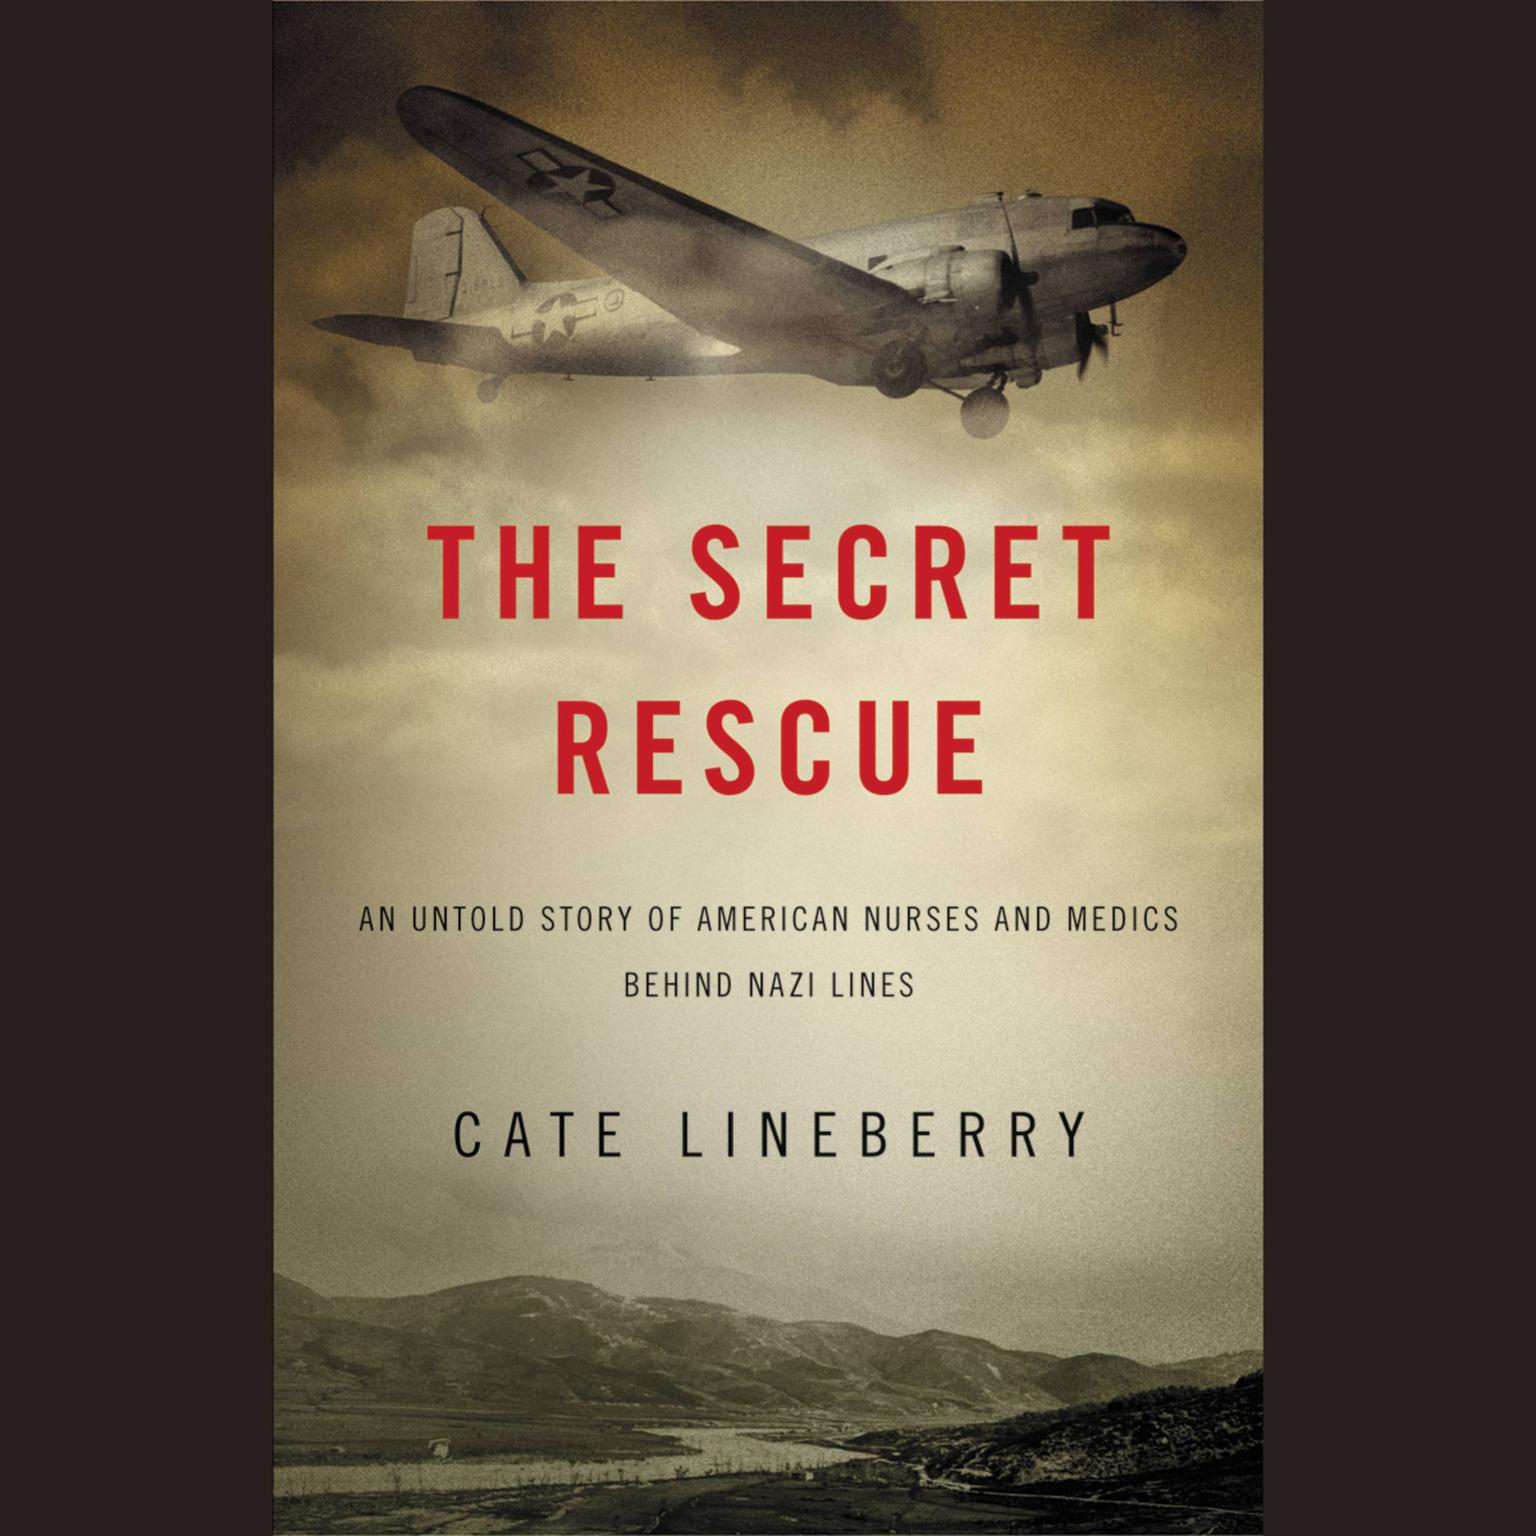 The Secret Rescue: An Untold Story of American Nurses and Medics Behind Nazi Lines Audiobook, by Cate Lineberry